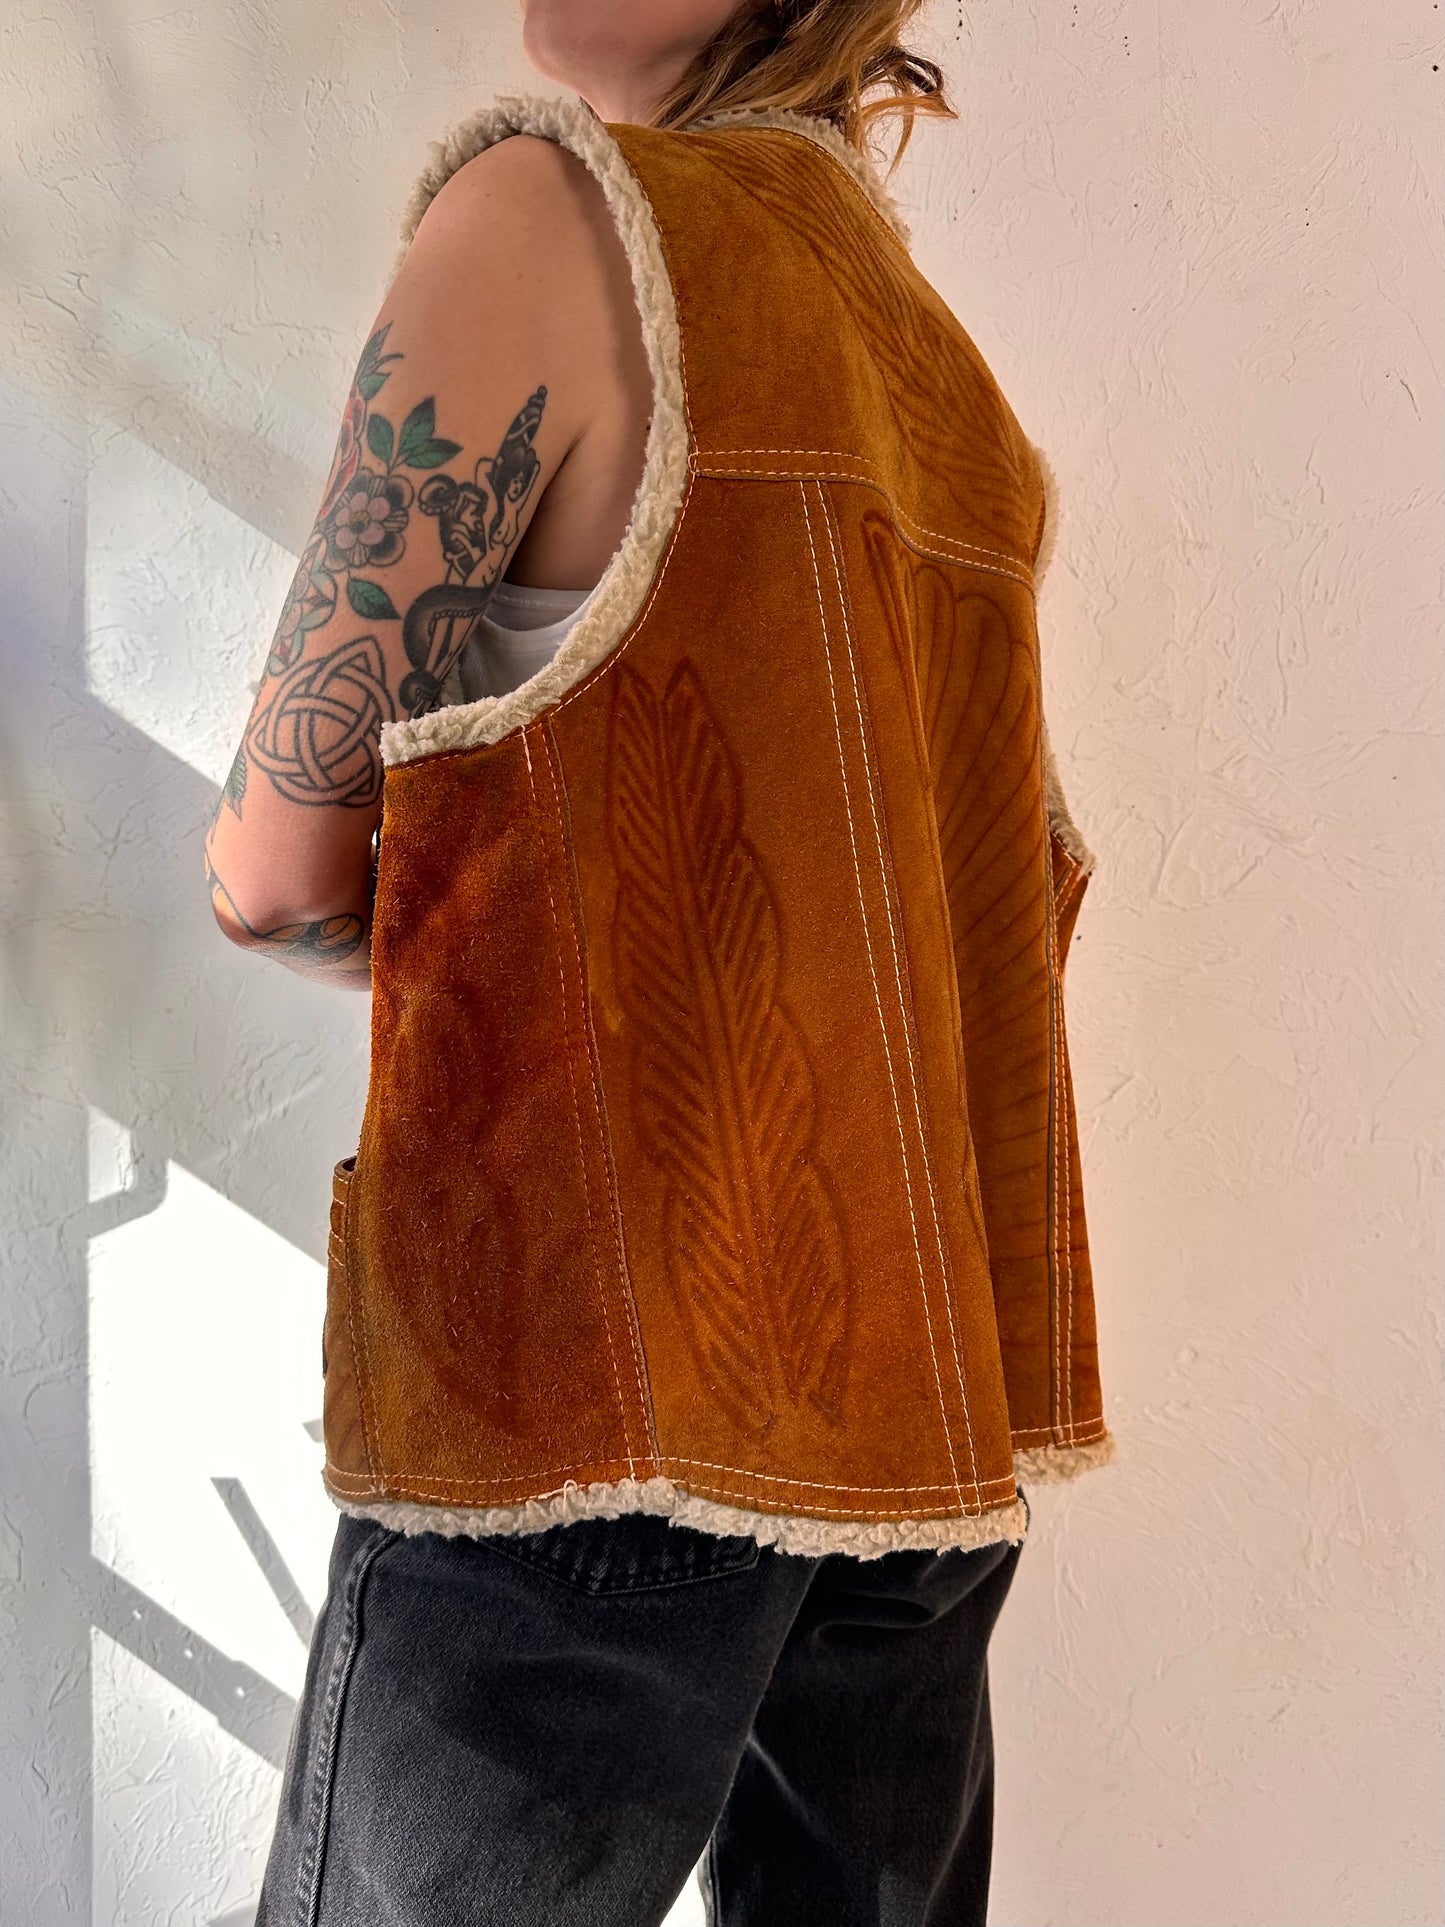 80s 'Genuine Leather' Suede Leather Vest / Large